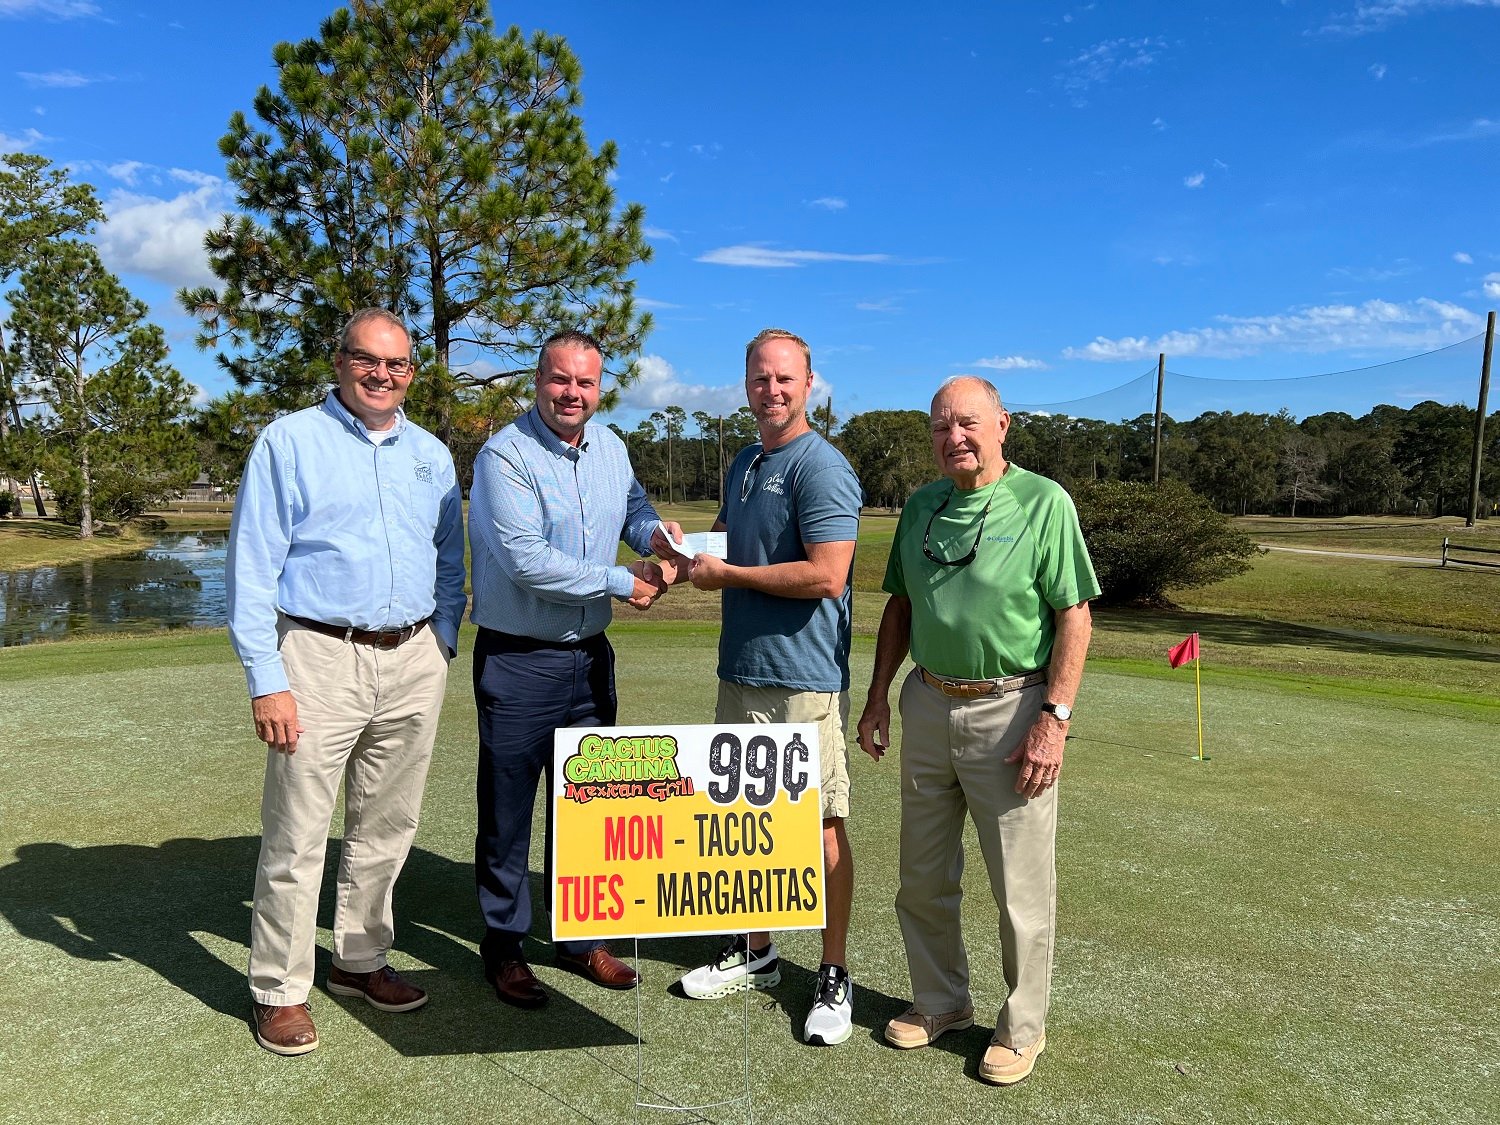 Ernie Culpepper of Georgia won $250 for a hole-in-one on Hole 3, sponsored by Cactus Cantina, at the Orange Beach Golf Center’s November Skins Game. From left are City Administrator Ken Grimes Jr., Culpepper’s friend Christopher Dismuke who accepted it on his behalf, Caucus Cantina owner Bobby Wade and Skins Game committee member John Hulen.